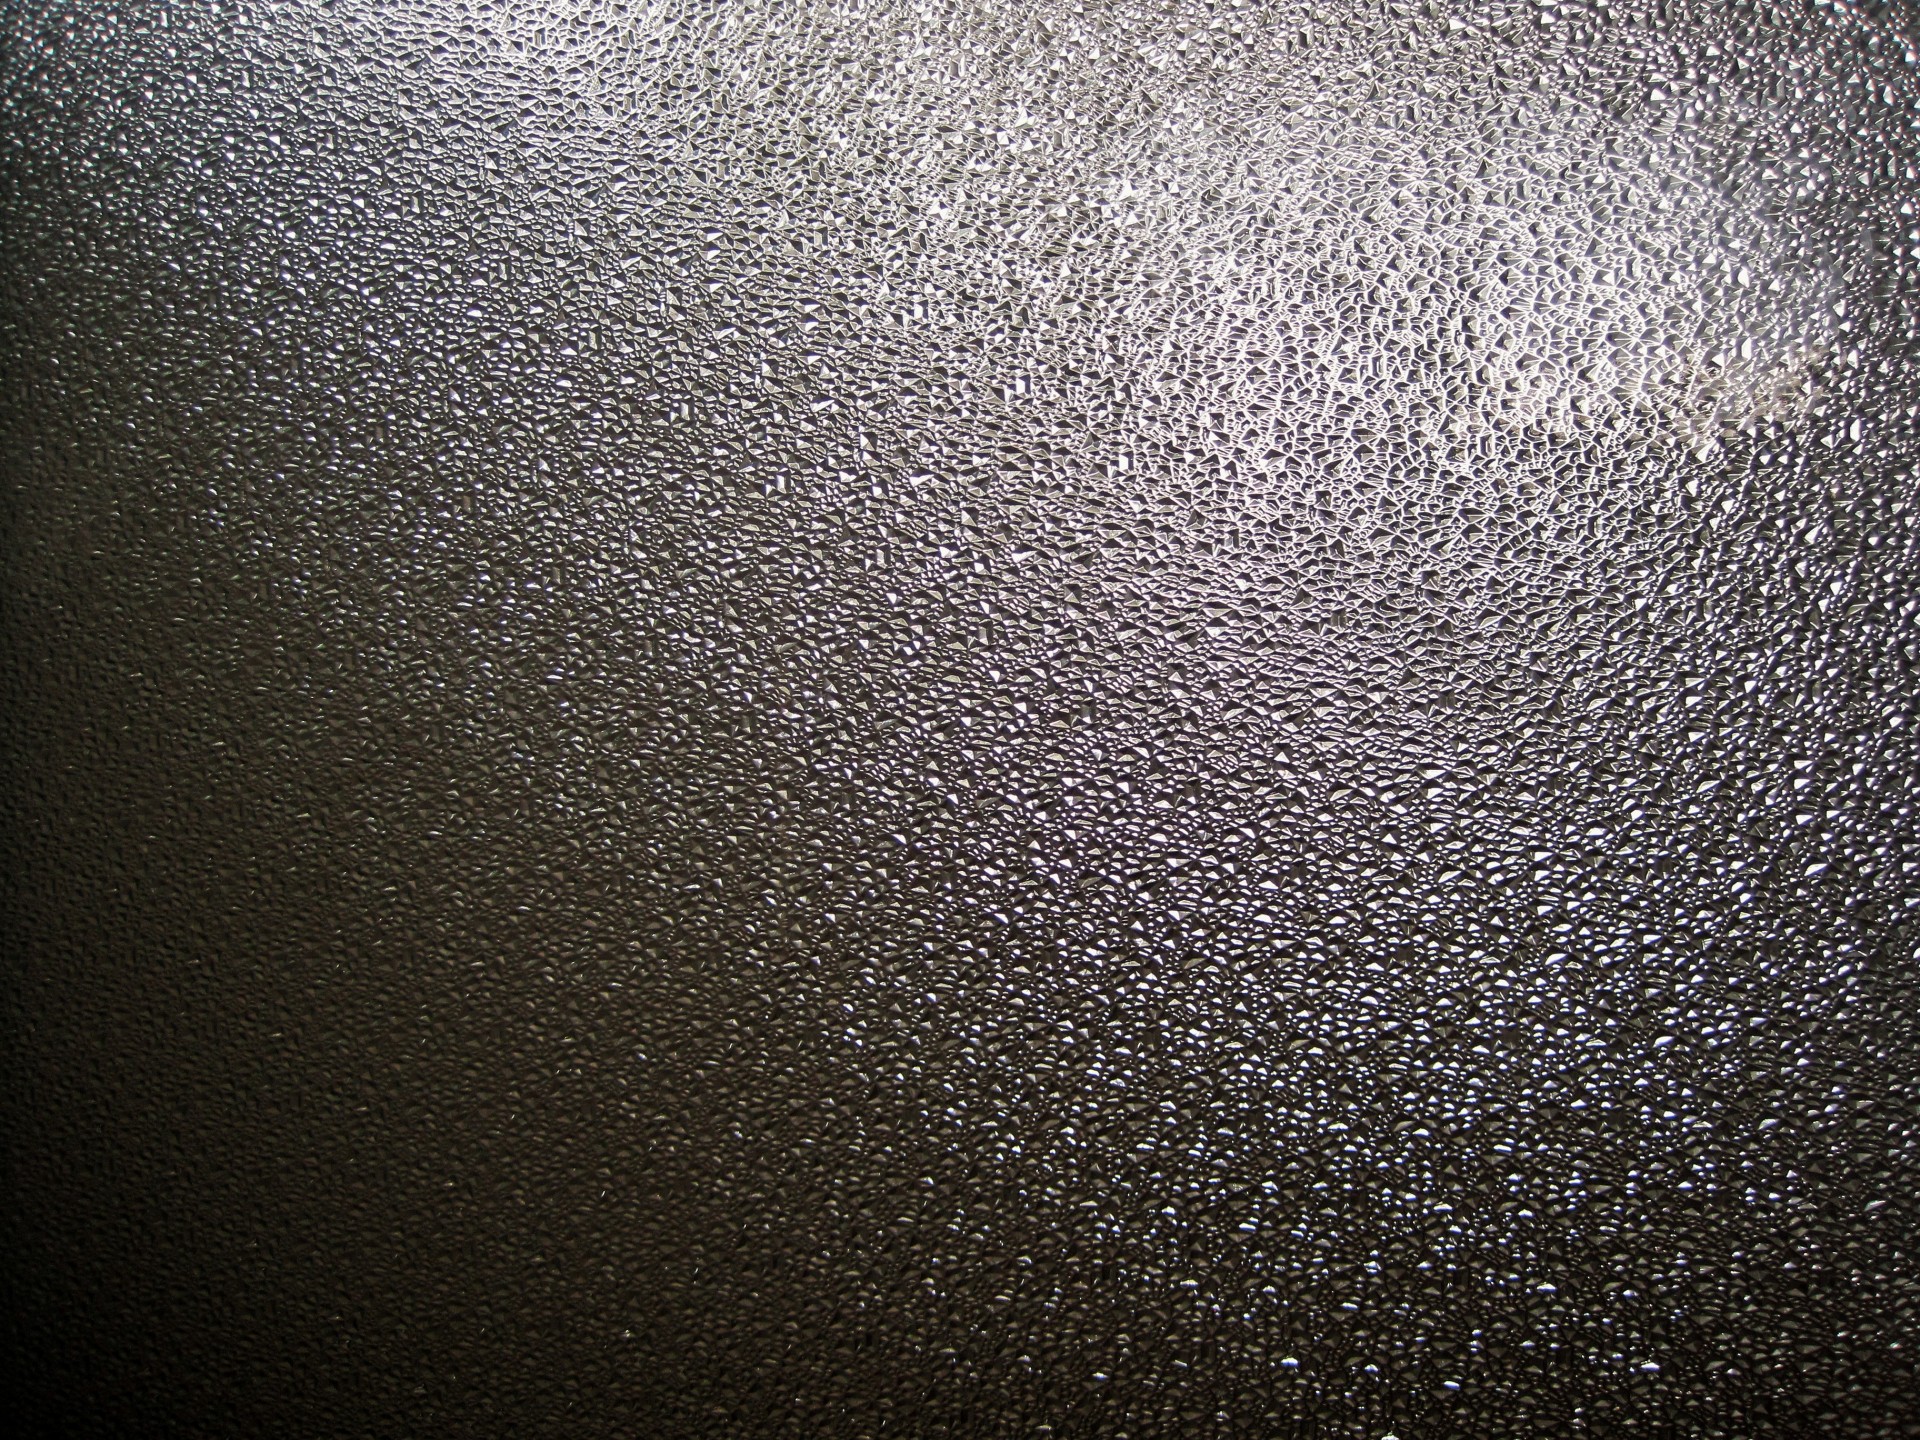 Glass With Fine Texture